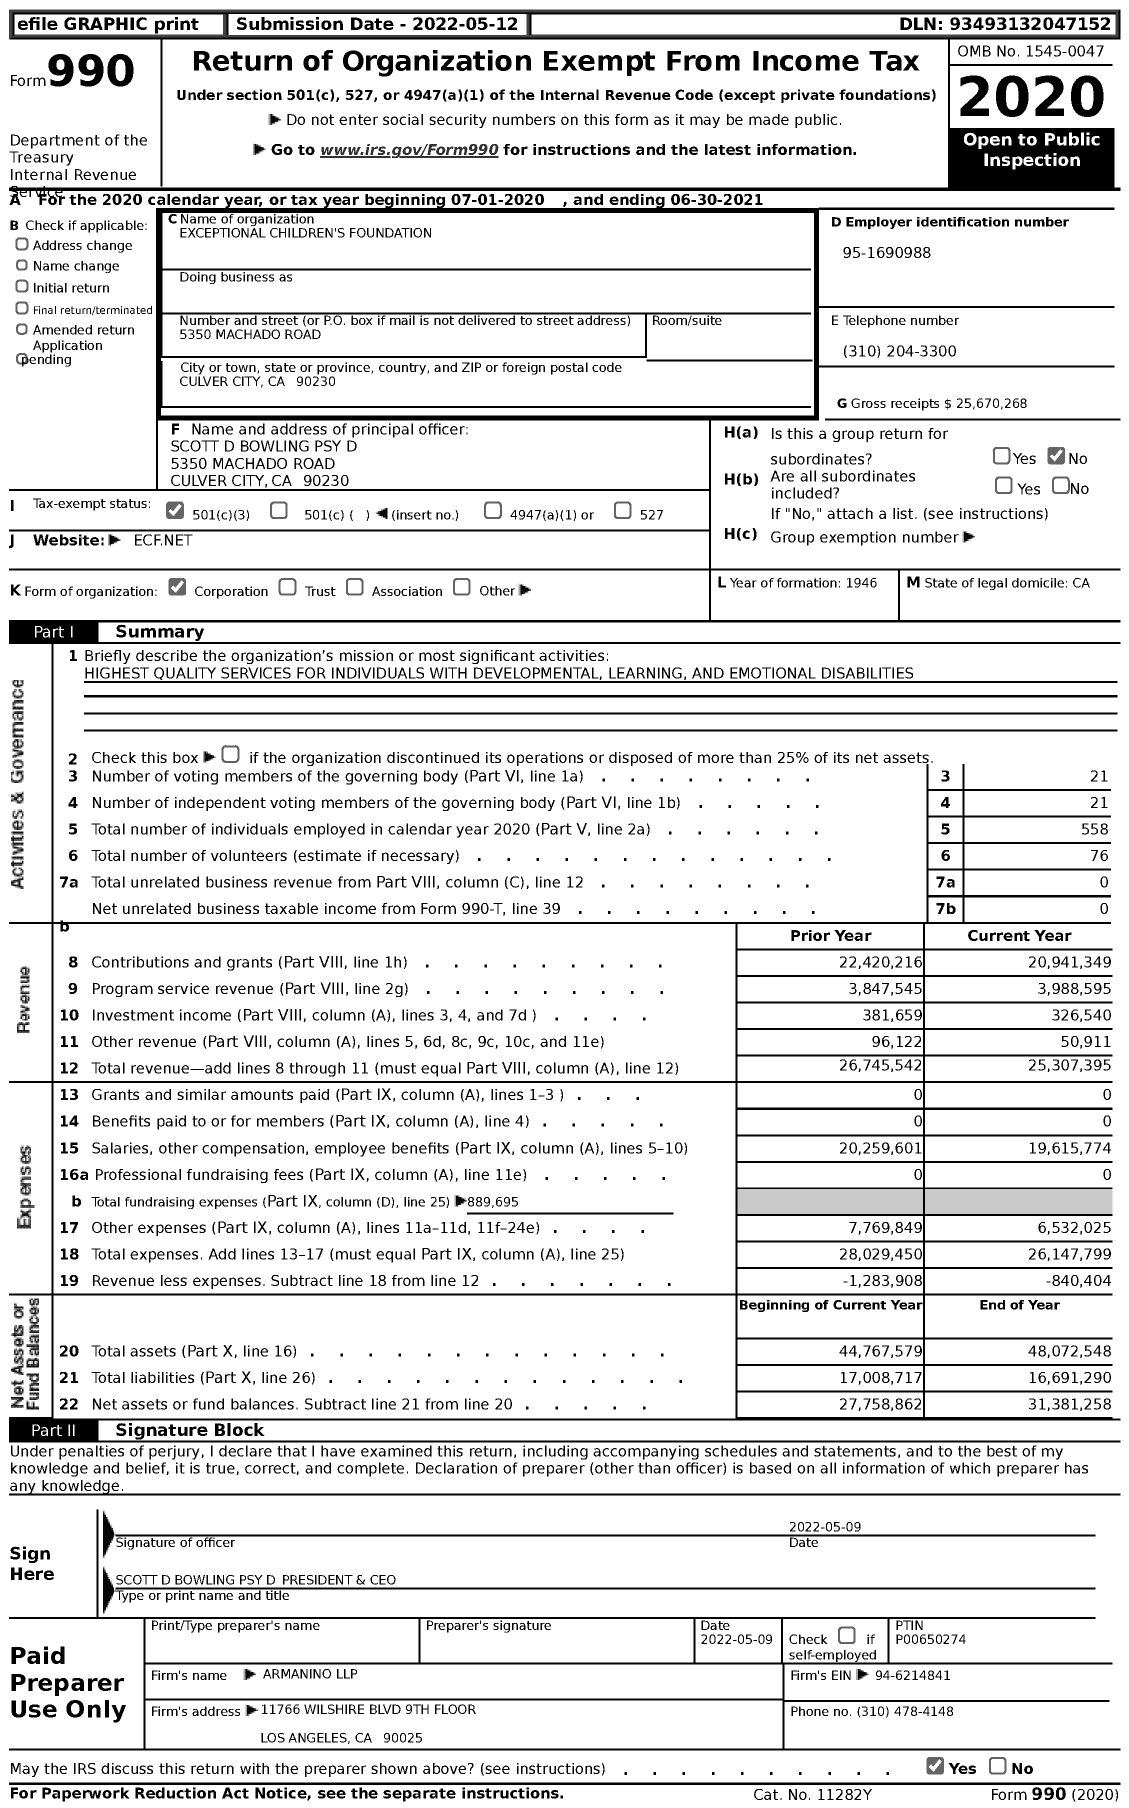 Image of first page of 2020 Form 990 for Exceptional Children's Foundation (ECF)